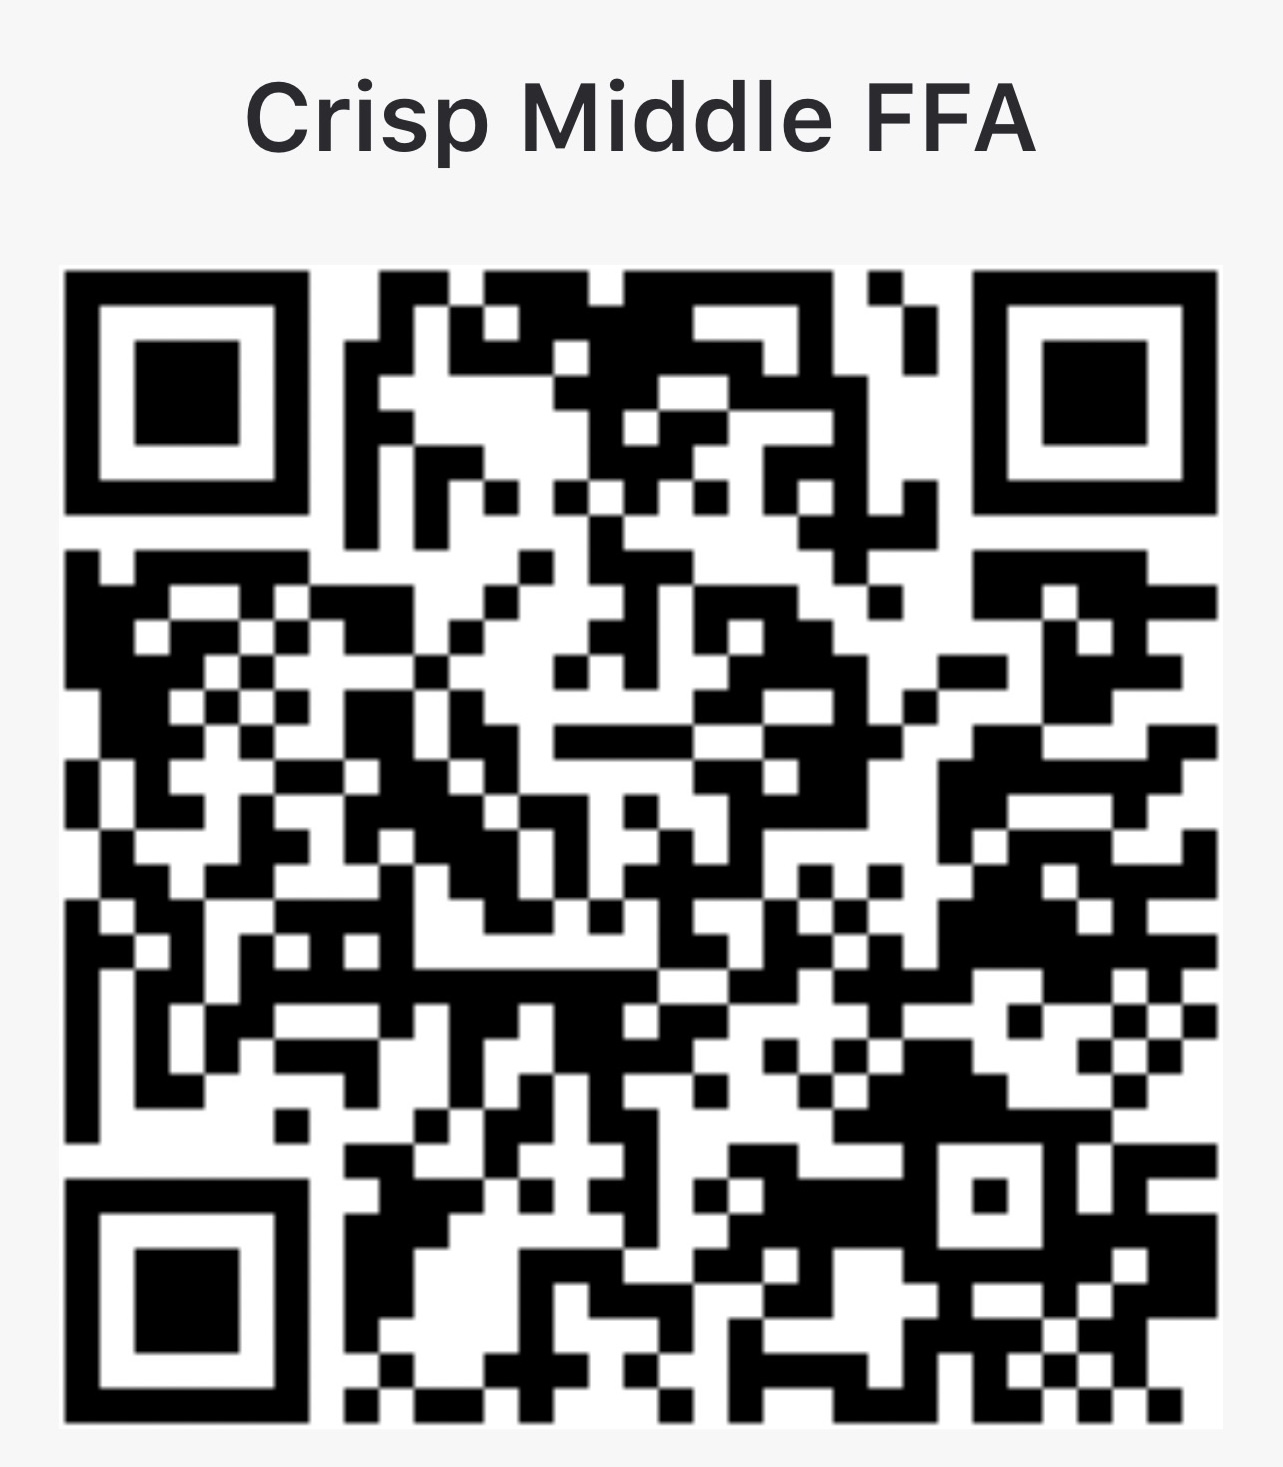 QR code to join FFA